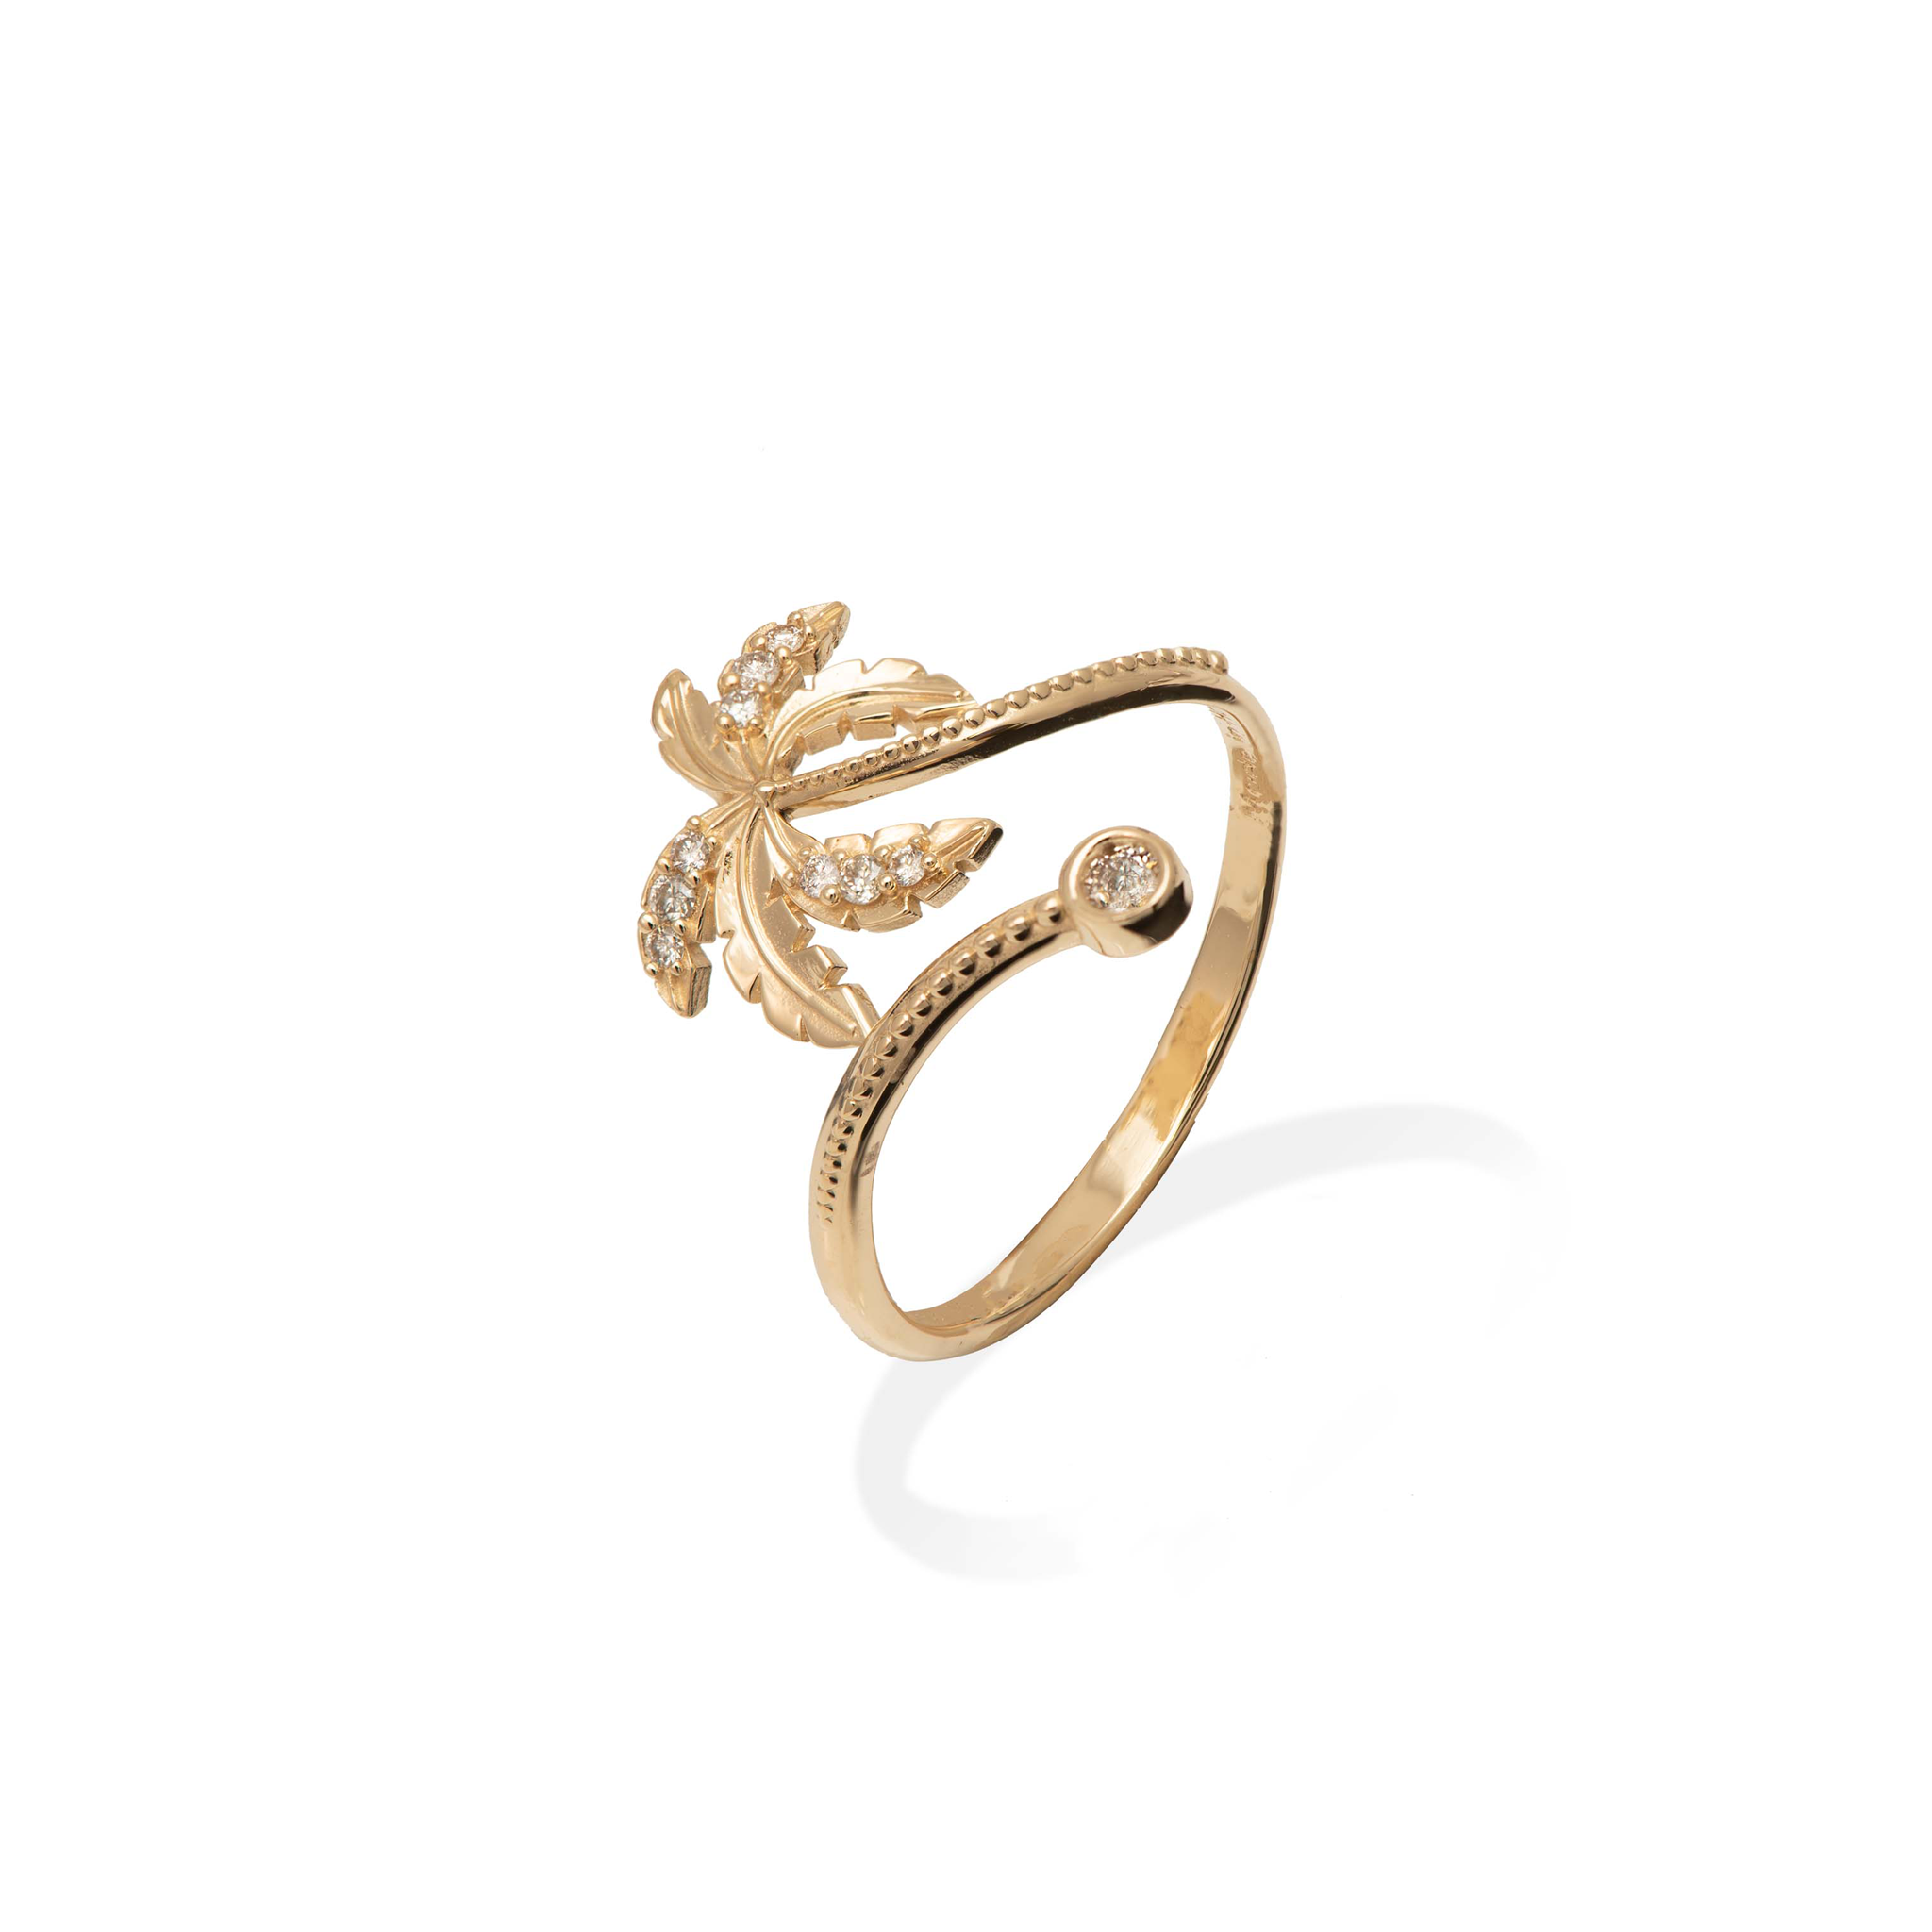 Paradise Palms - Palm Tree Ring in Gold with Diamonds - 18mm